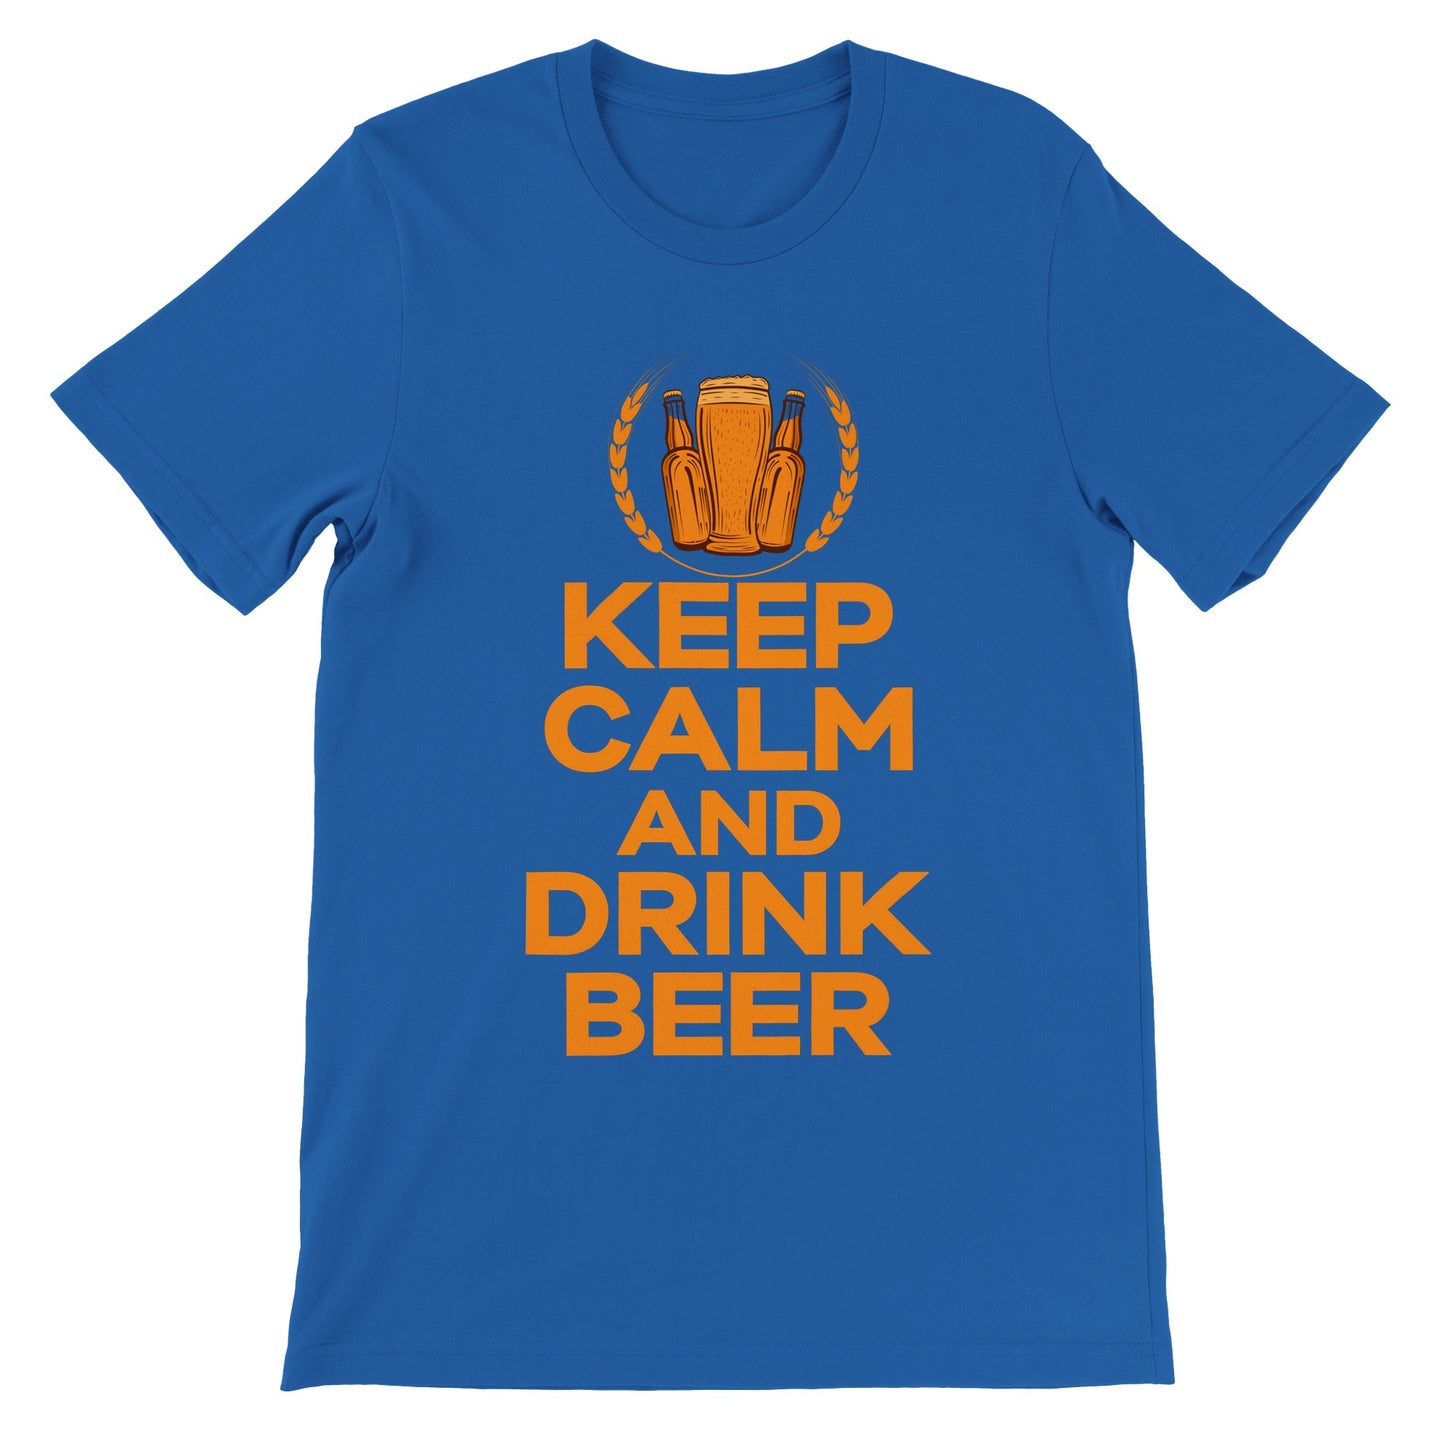 Funny T-Shirts - Keep Calm And Drink Beer - Premium Unisex T-Shirt 